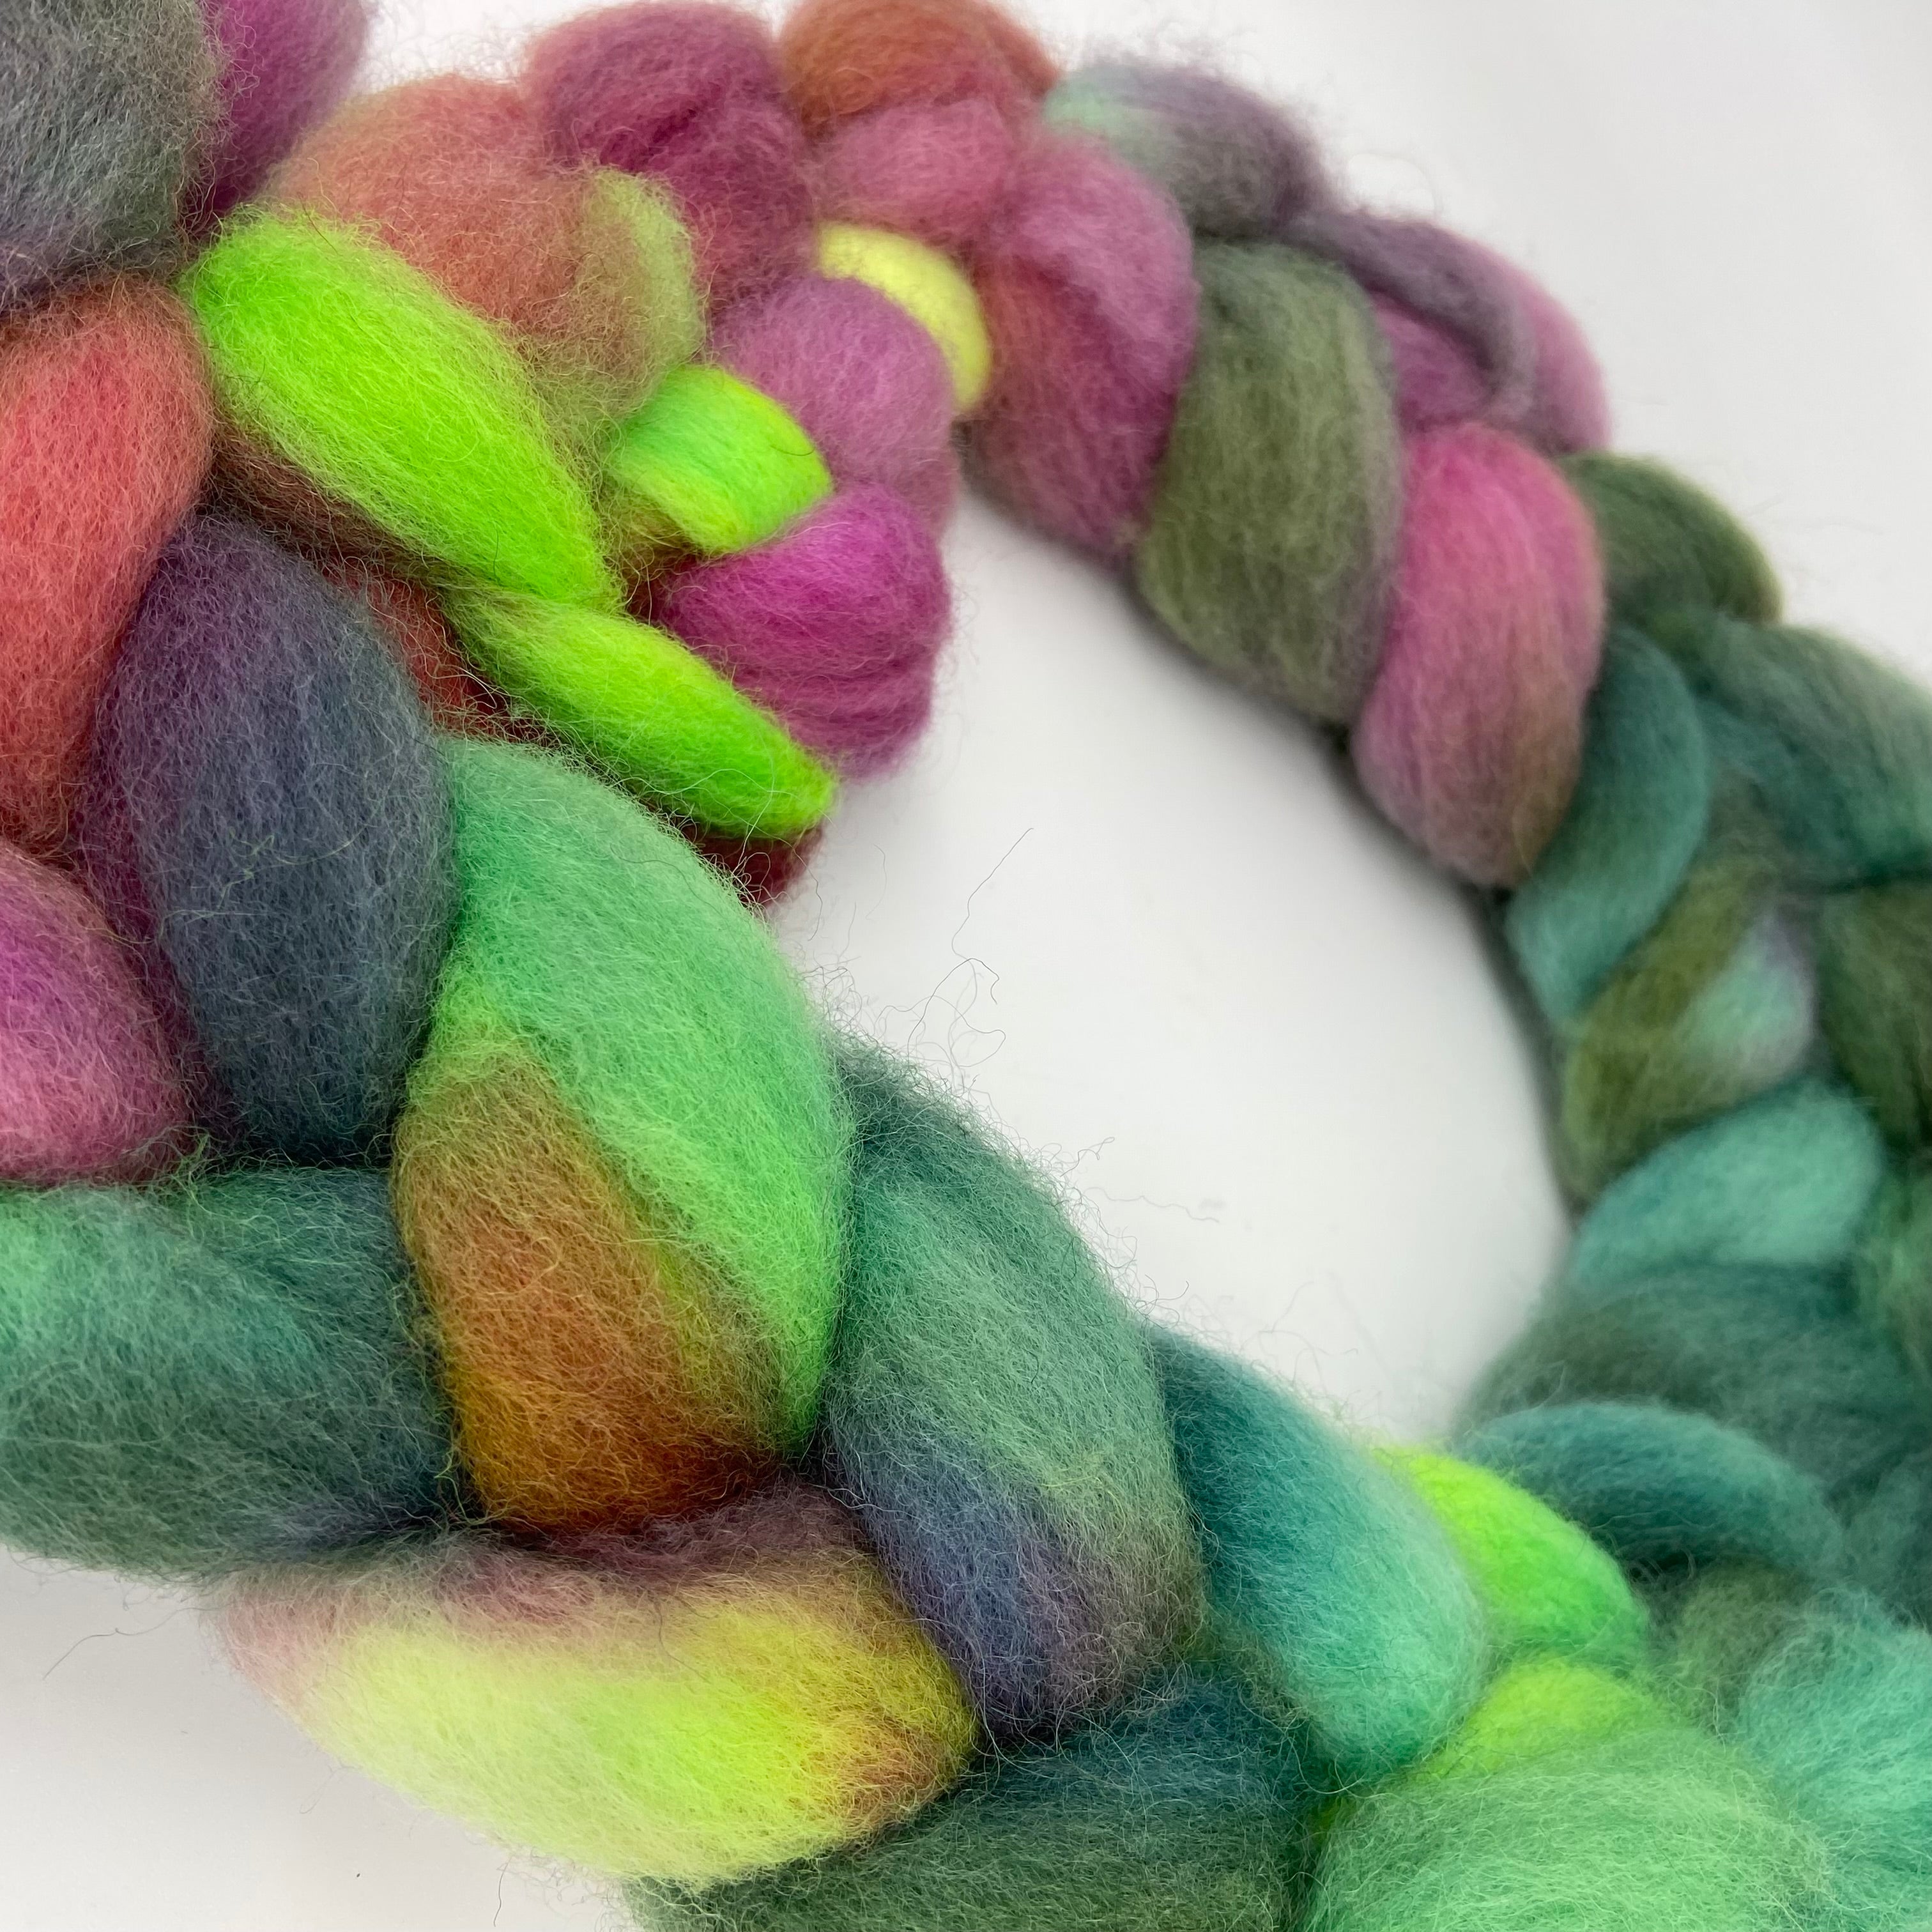 Single Batch 355 on British Sheltand - 100g Top in a Spinners Braid